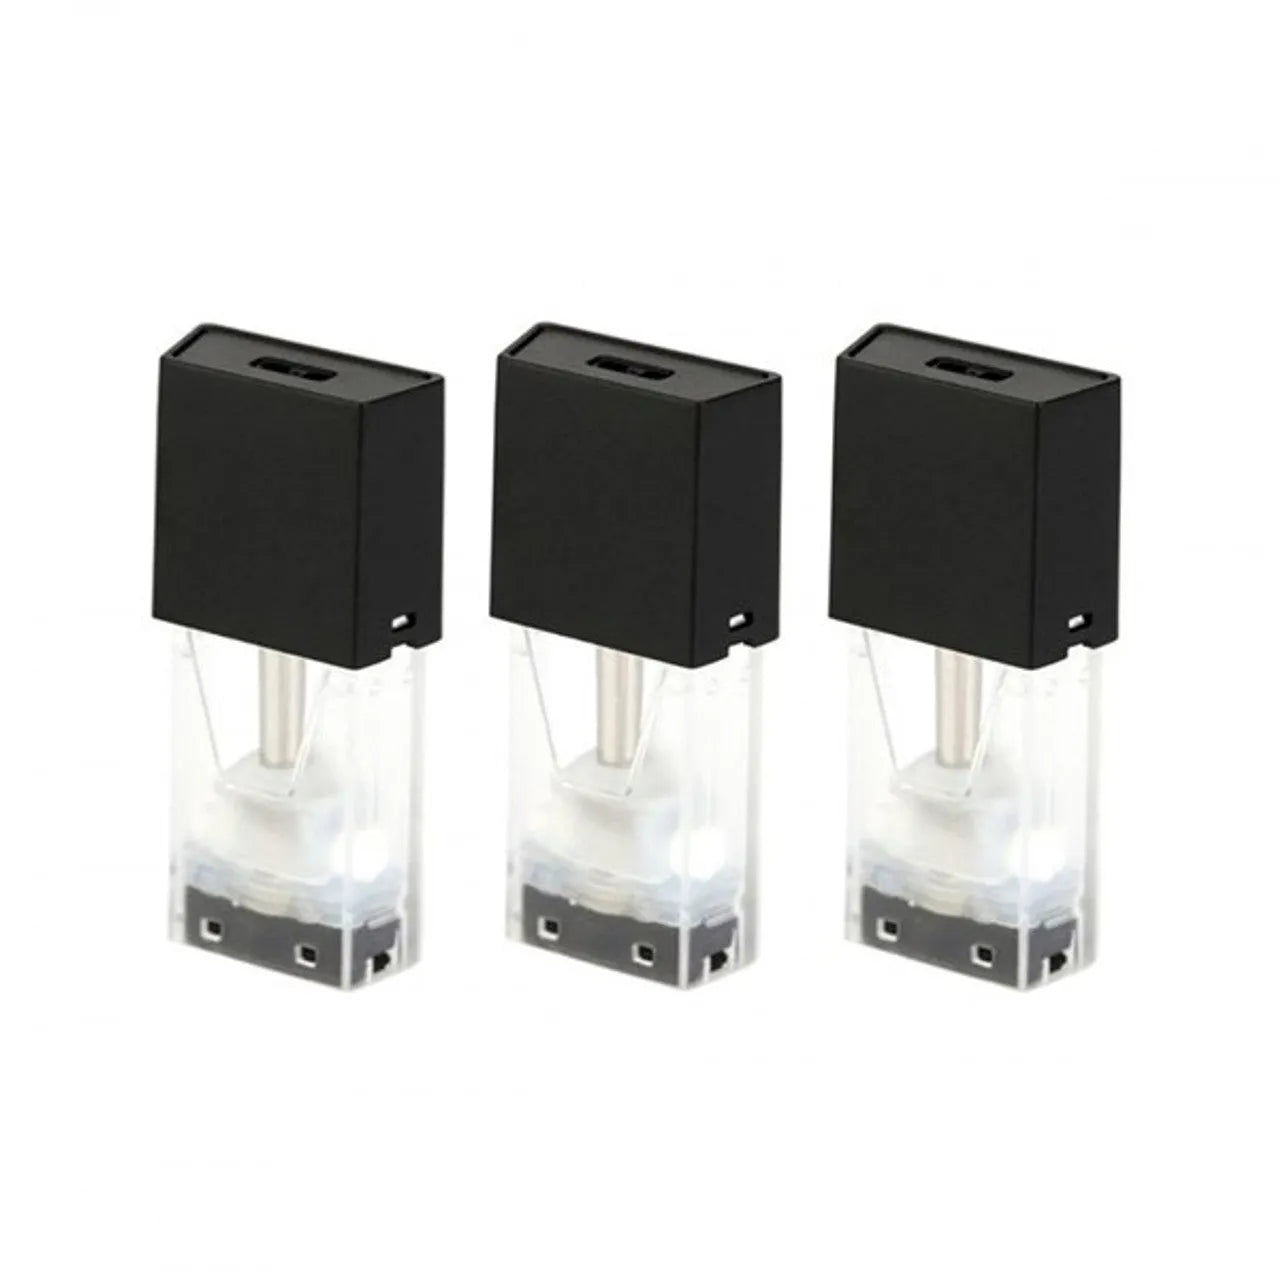 Smok Fit 1.4ohm Replacement Pods 3pk | bearsvapes.co.uk